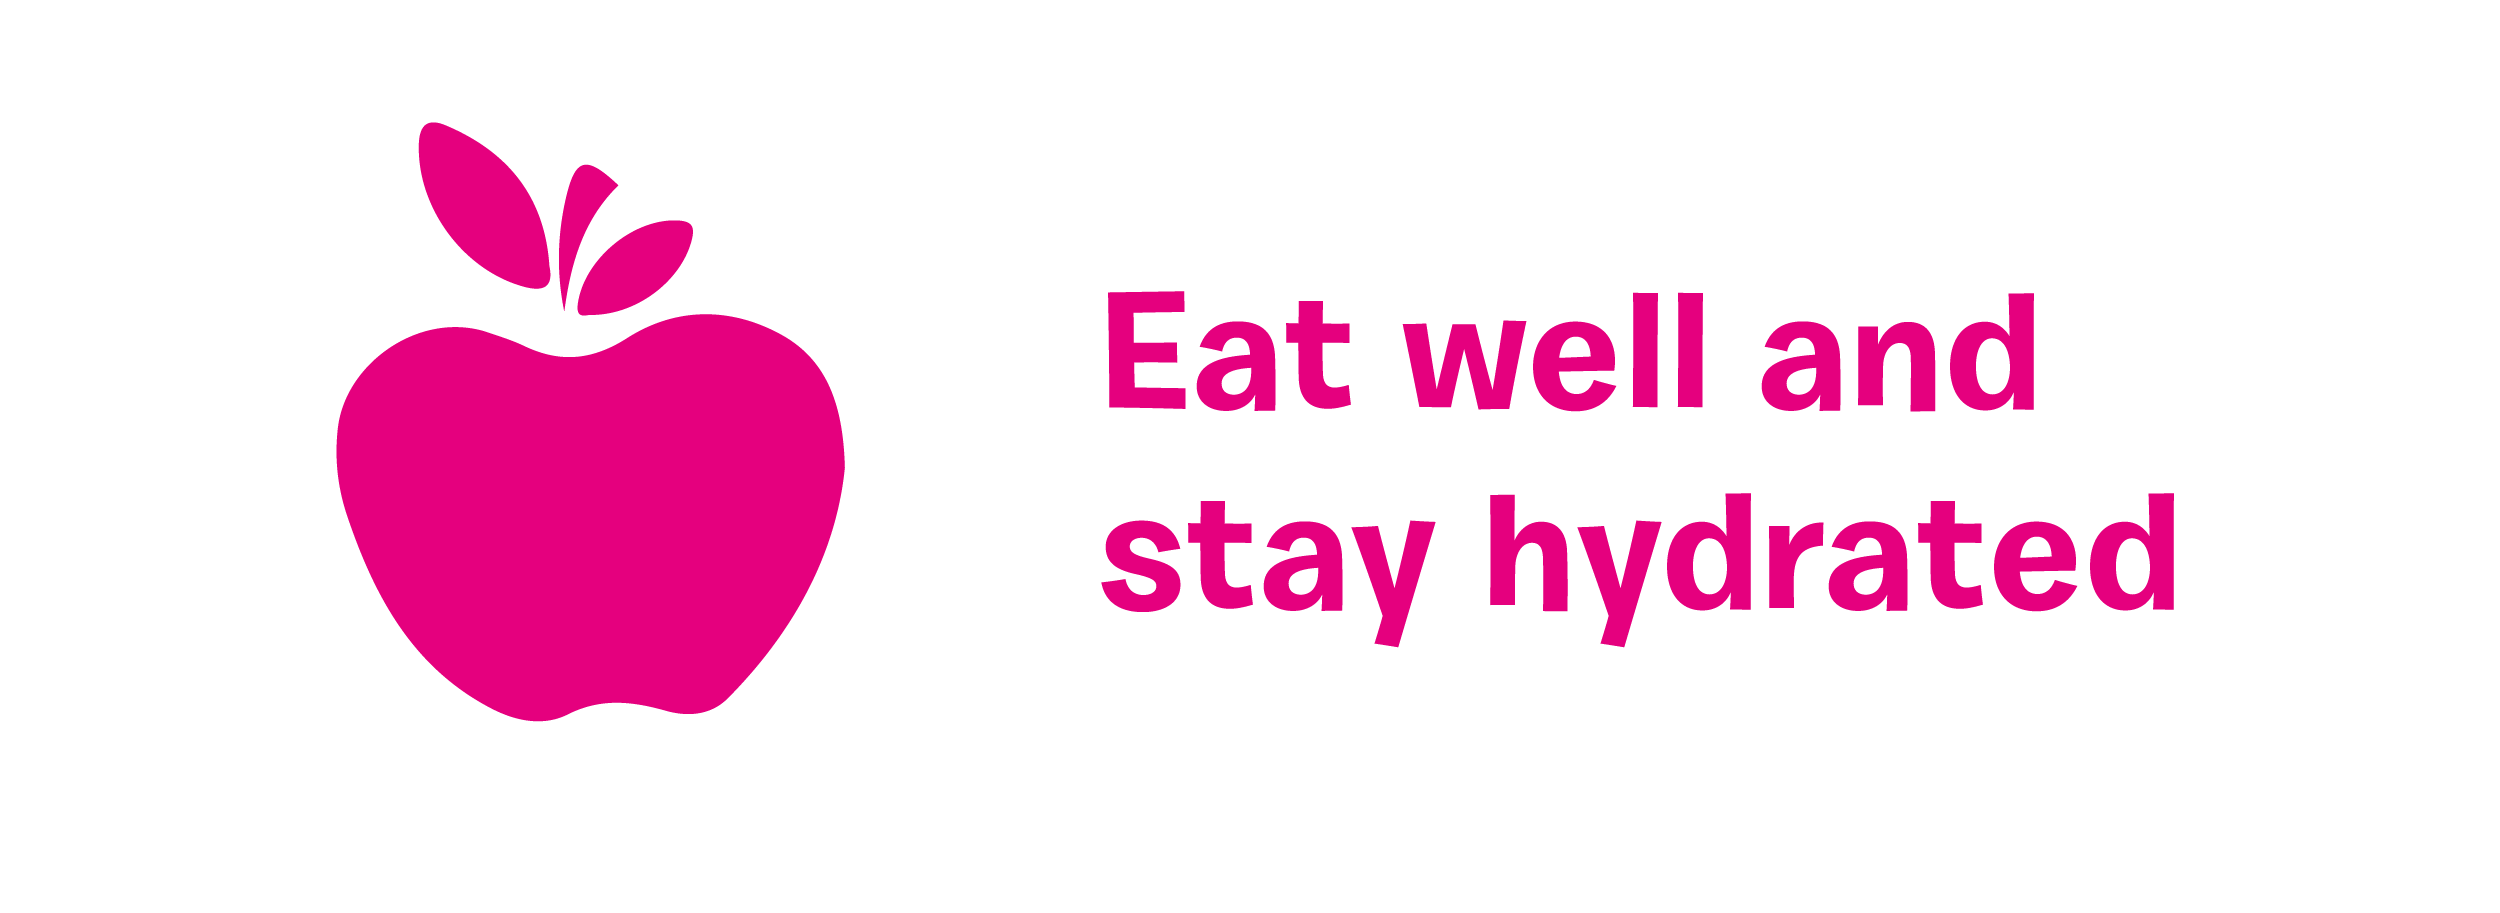 Eat well and stay hydrated